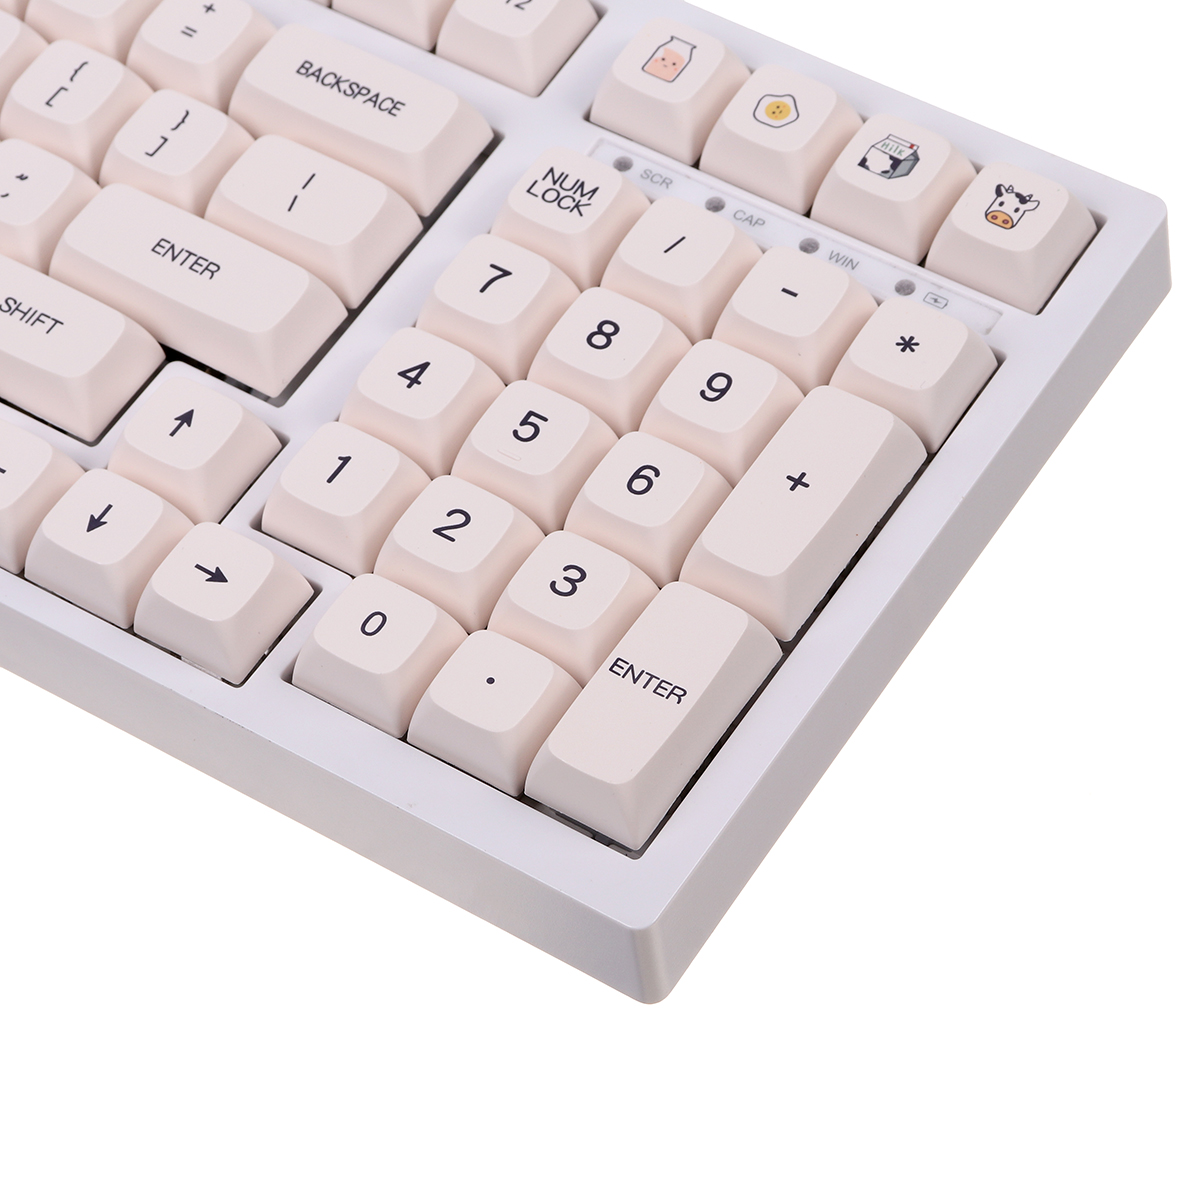 Find 124 Keys Milk PBT Keycap Set Sublimation XDA Profile English/Japanese Custom Keycaps for Mechanical Keyboard for Sale on Gipsybee.com with cryptocurrencies